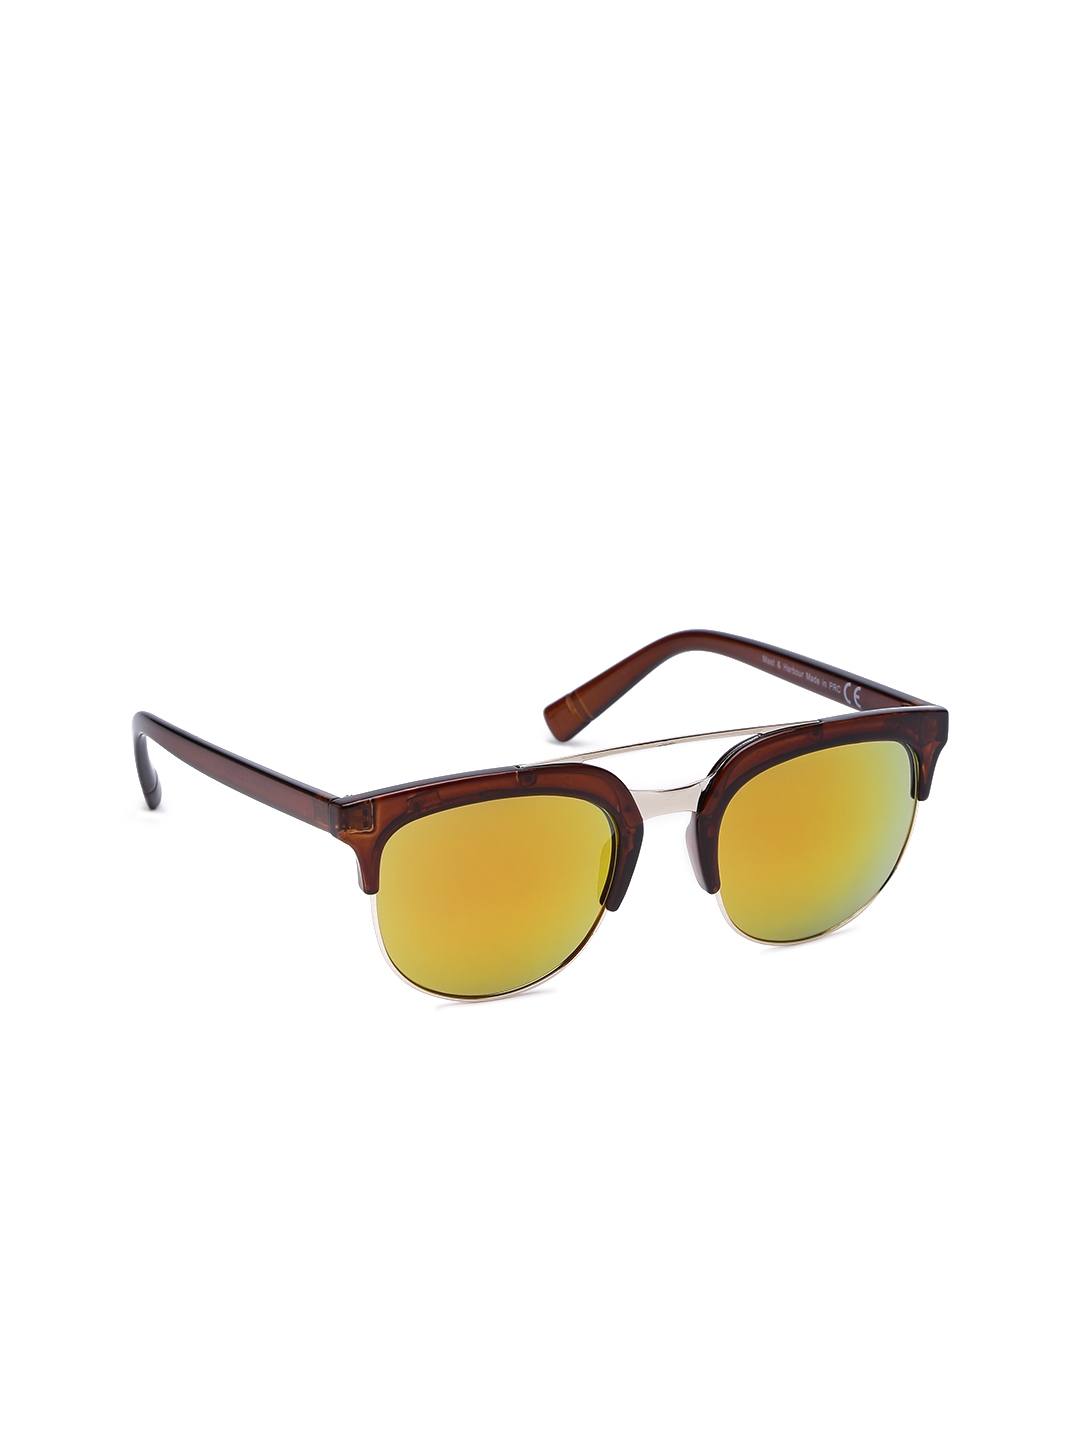 For 299/-(70% Off) Mast & Harbour Unisex Browline Sunglasses MFB-PN-PS-DSA1998 at Myntra